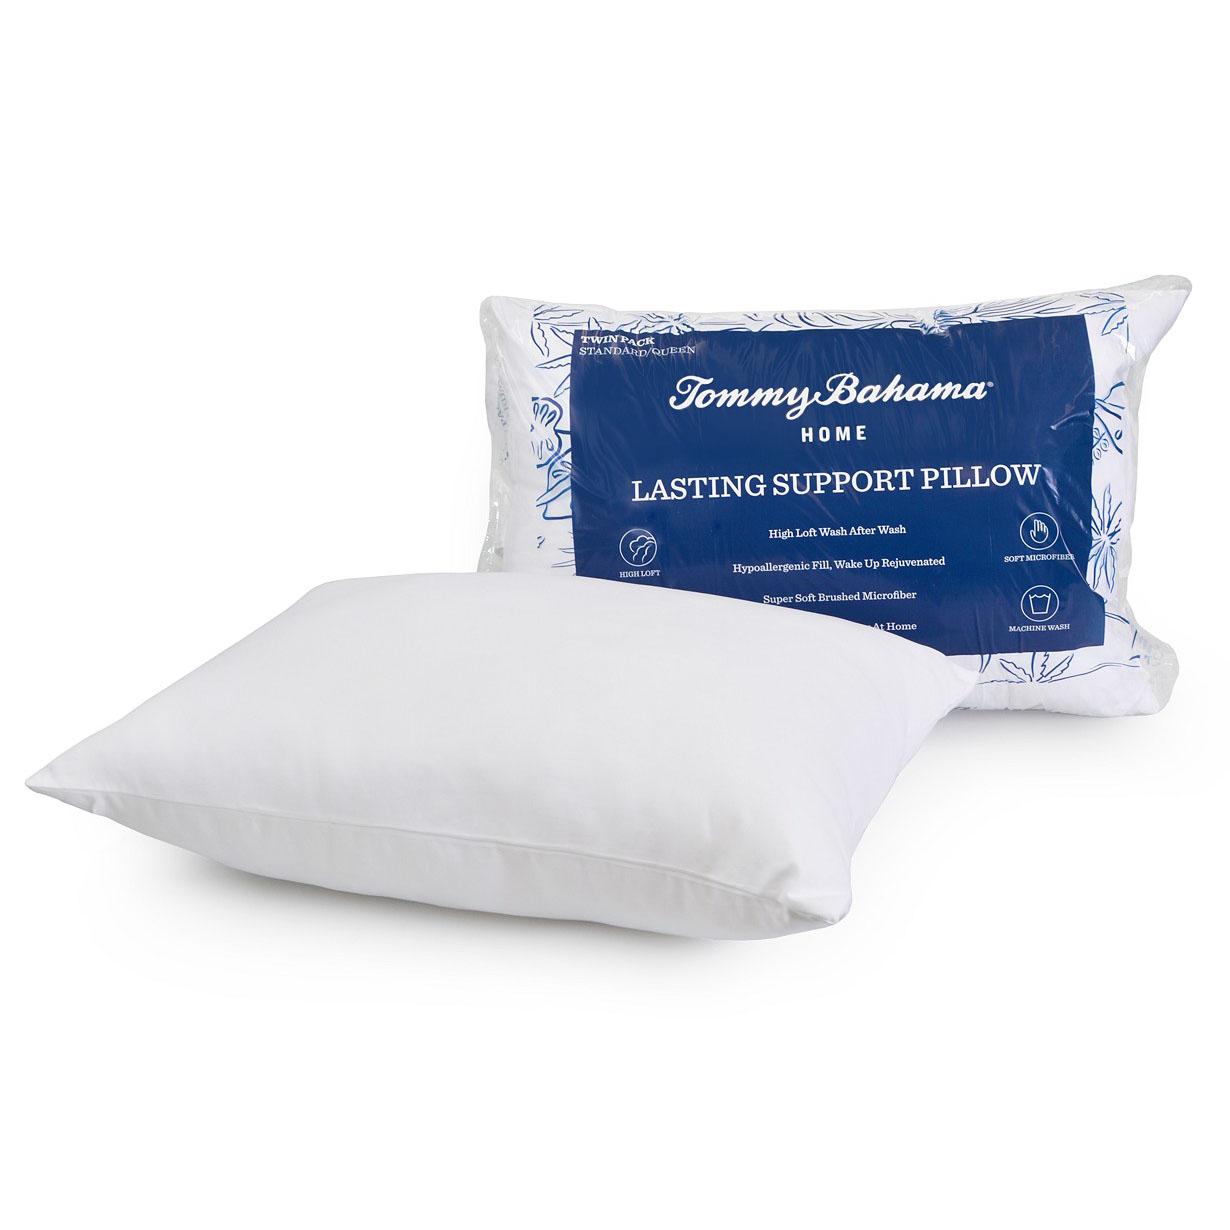 2 Tommy Bahama Lasting Support Pillow + Wash Towel for $11.98